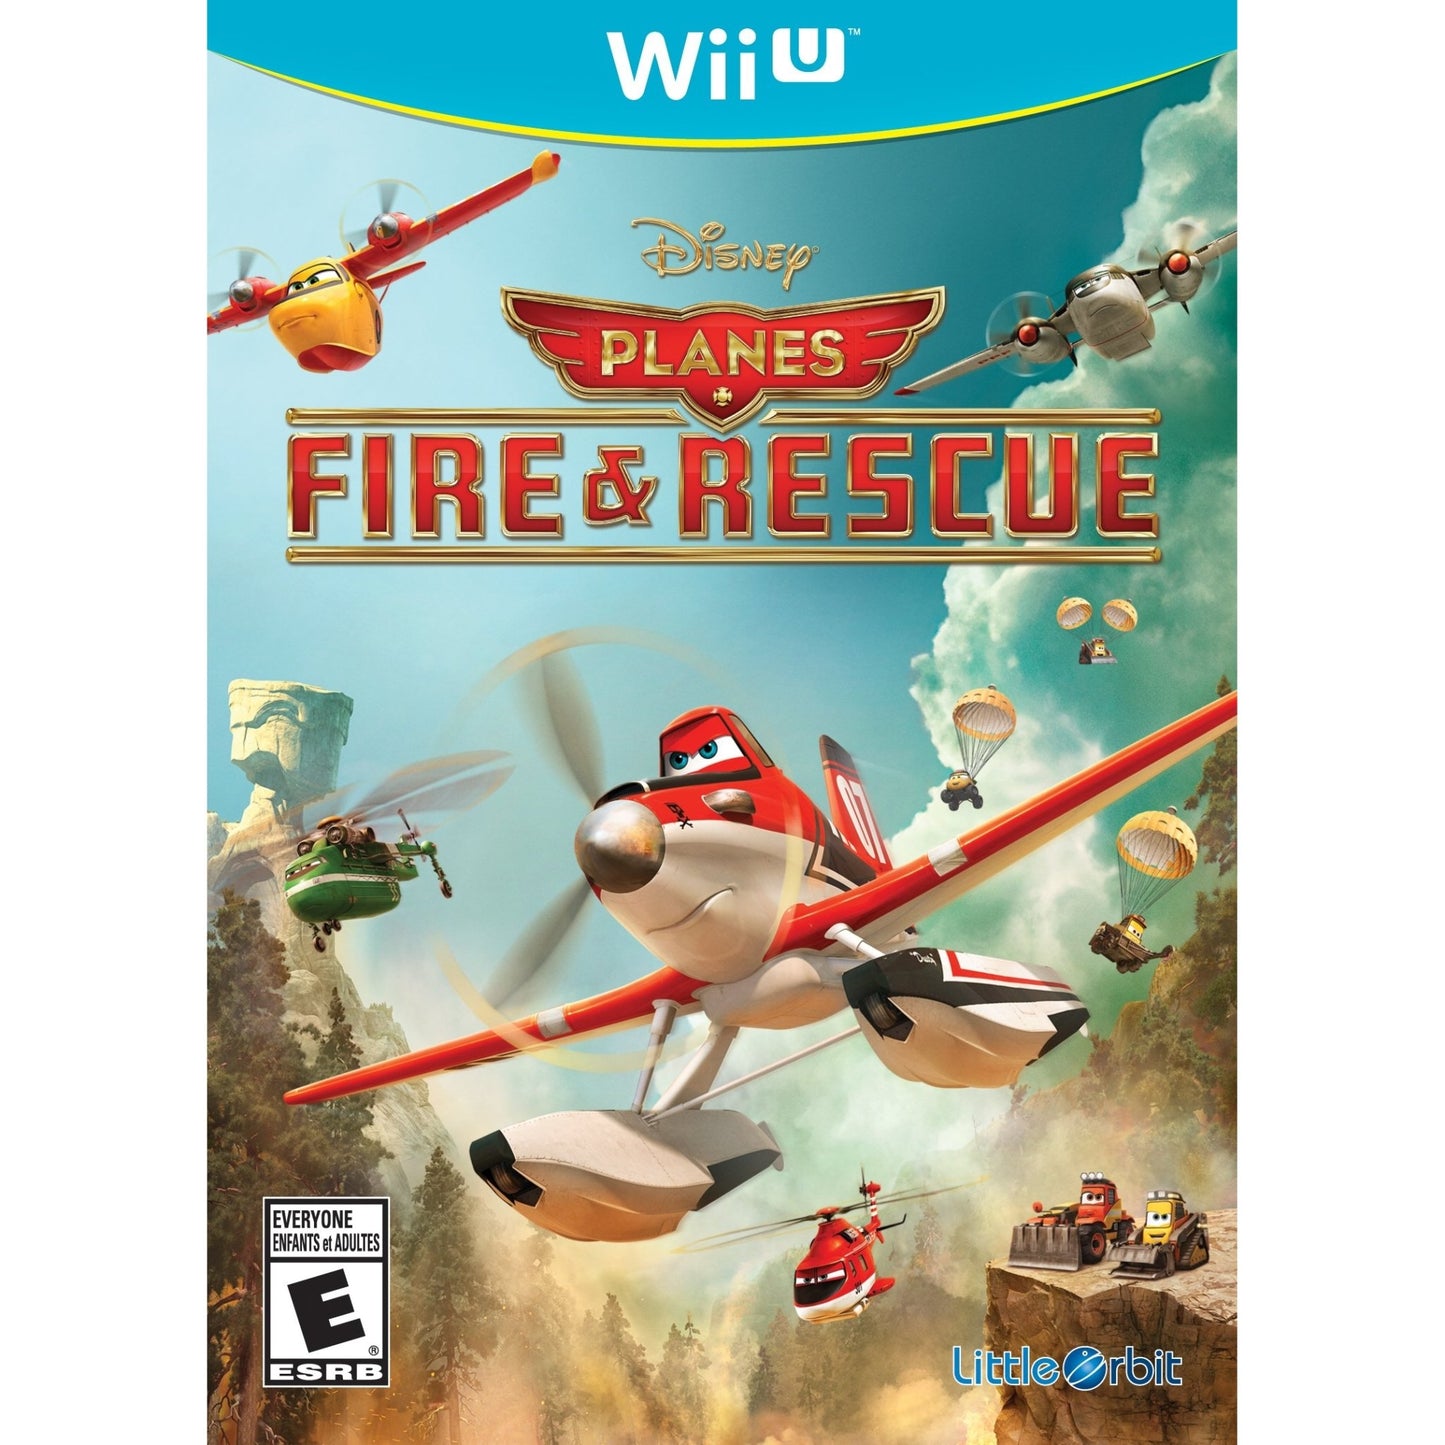 Disney Planes Fire & Rescue Nintendo Wii U Game from 2P Gaming